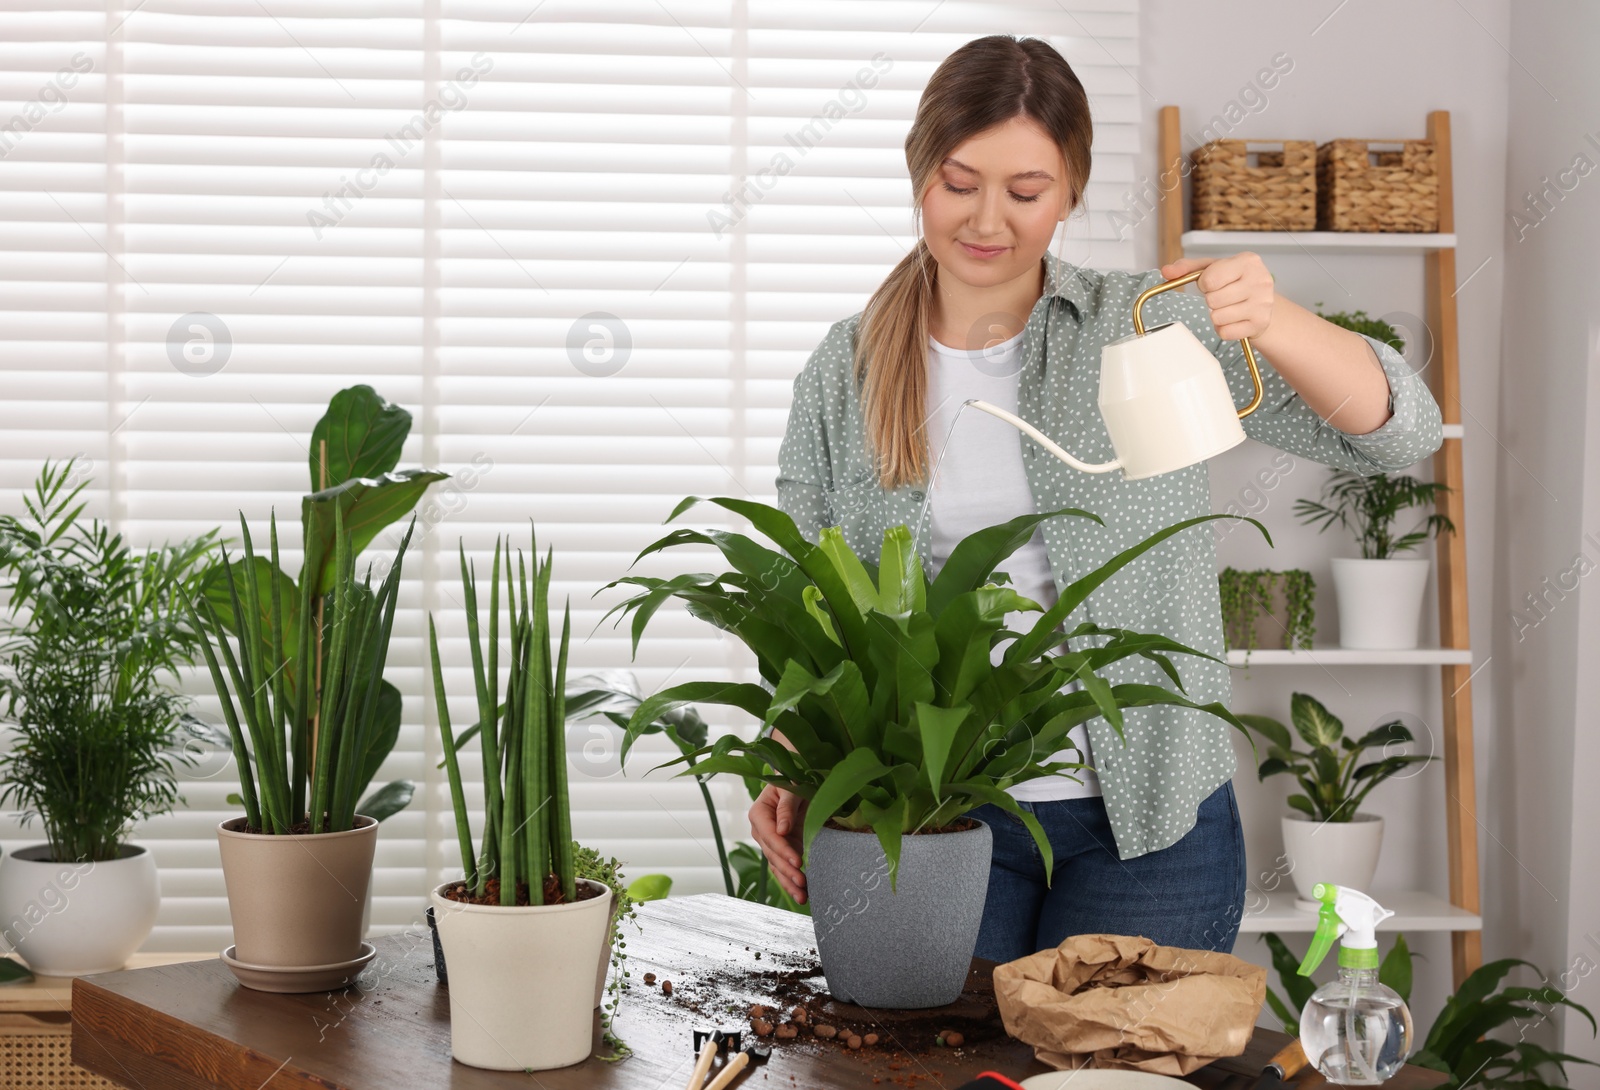 Photo of Woman watering houseplants after transplanting at wooden table indoors